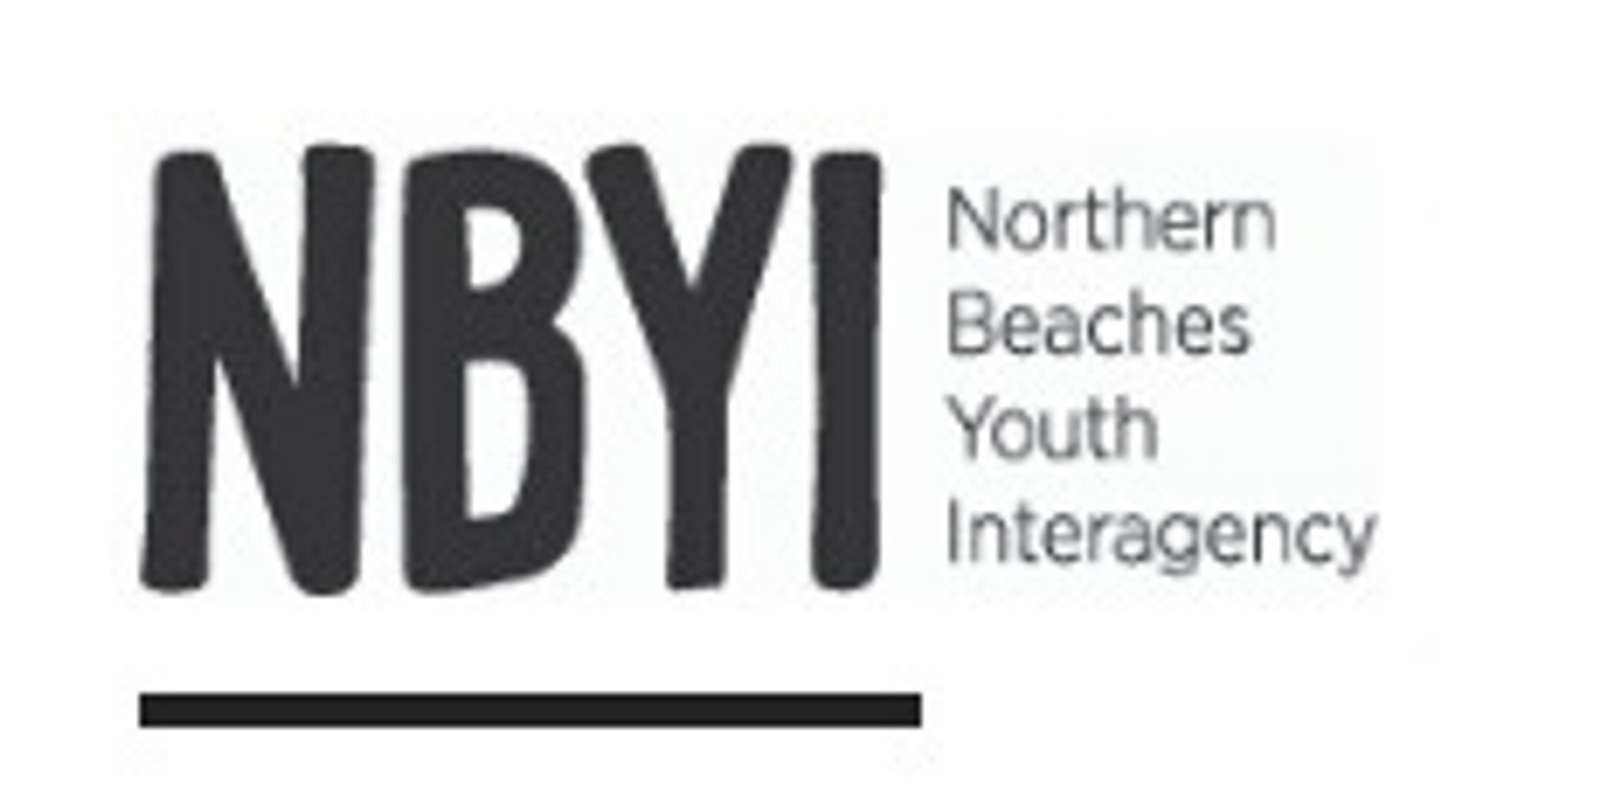 Northern Beaches Youth Interagency's banner